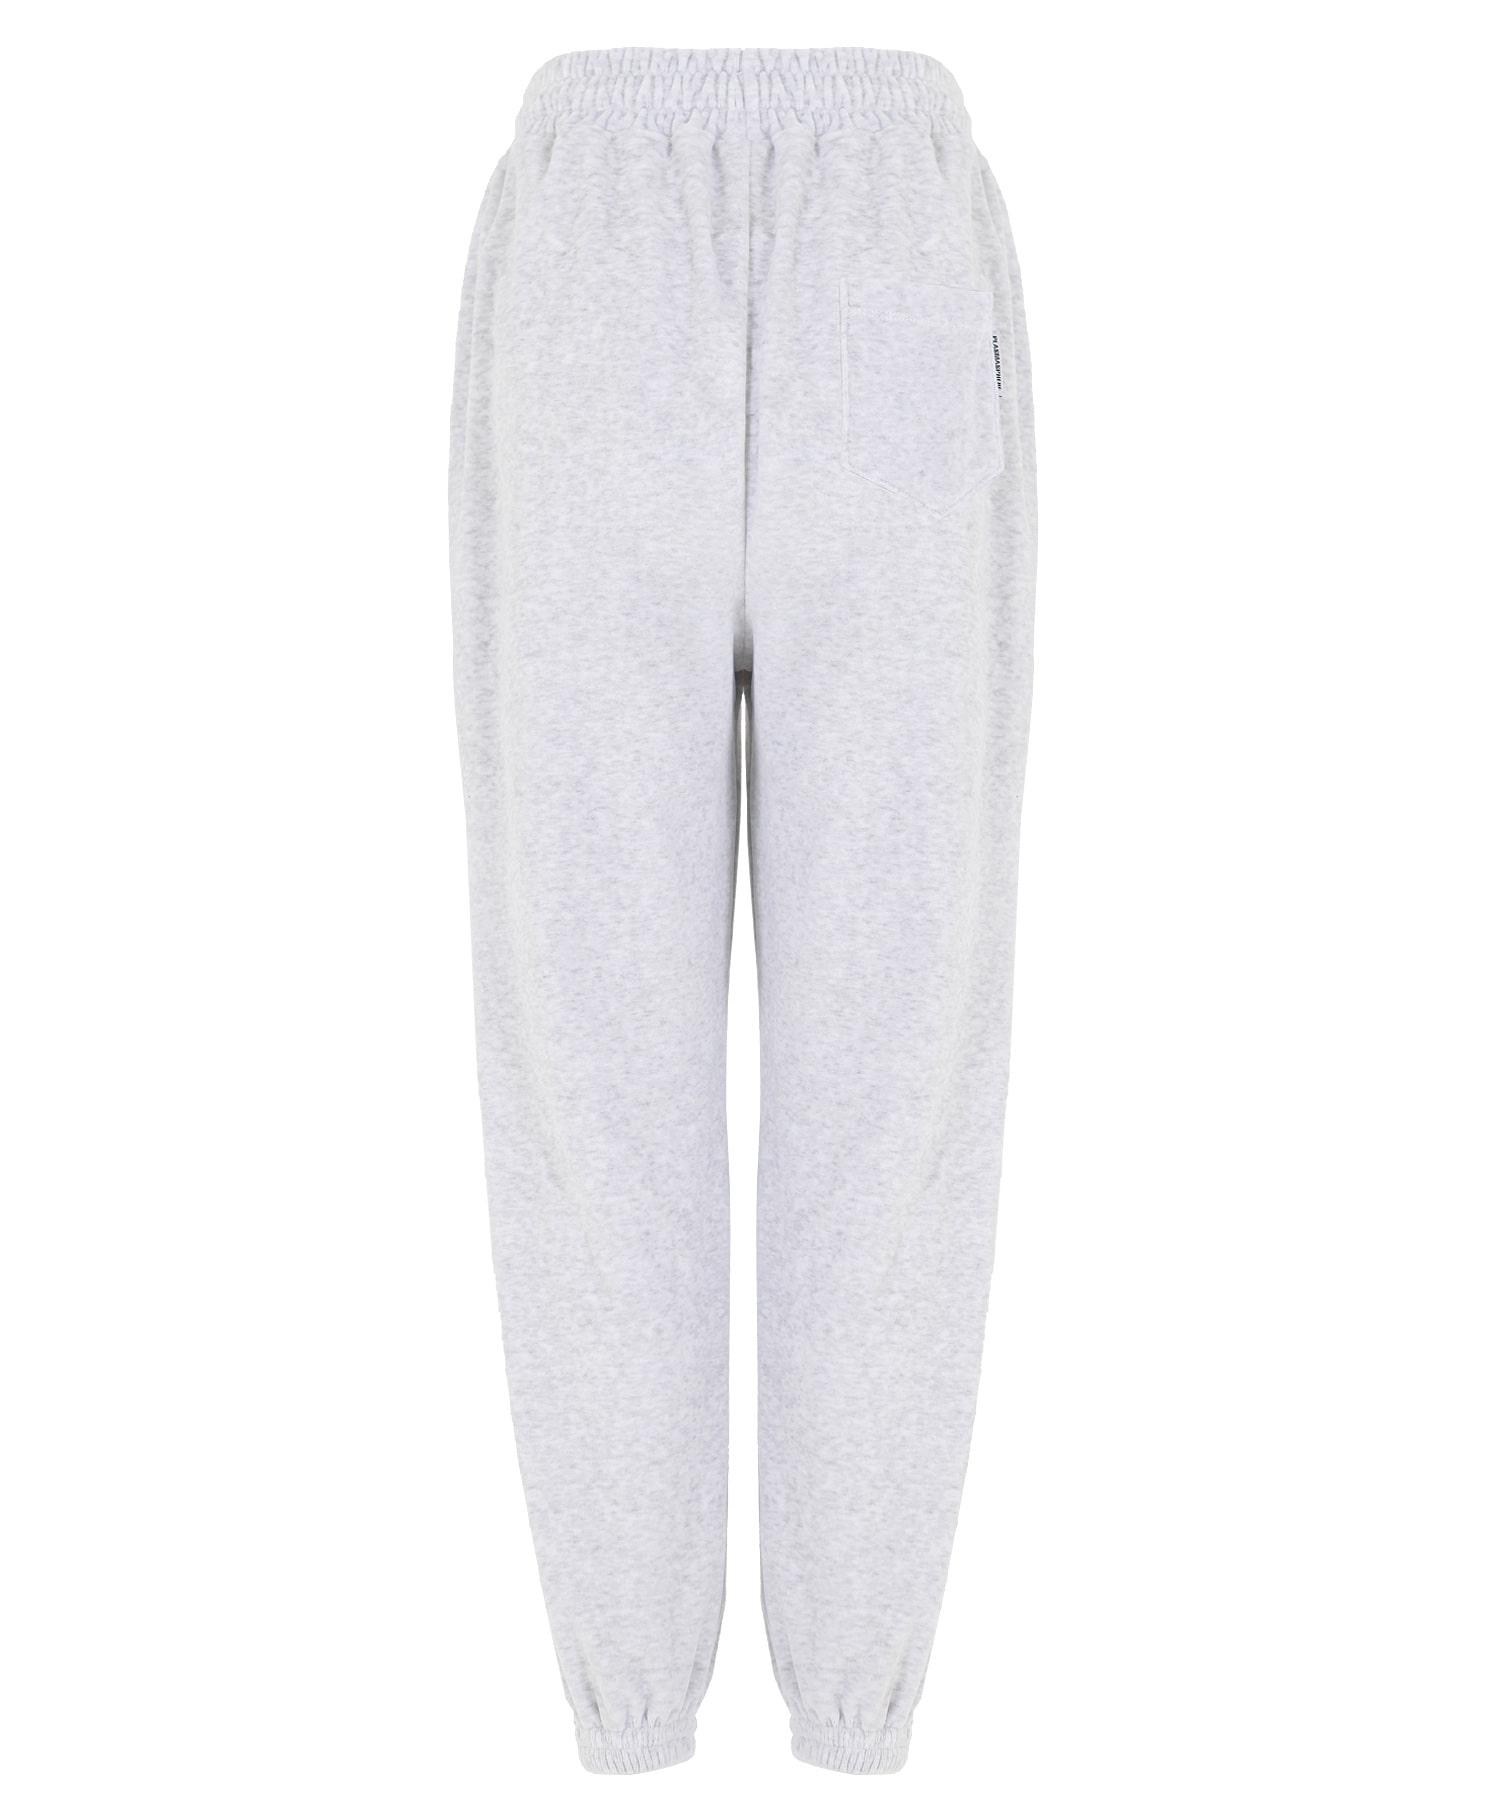 RELAX JOGGER PANTS IN GREY